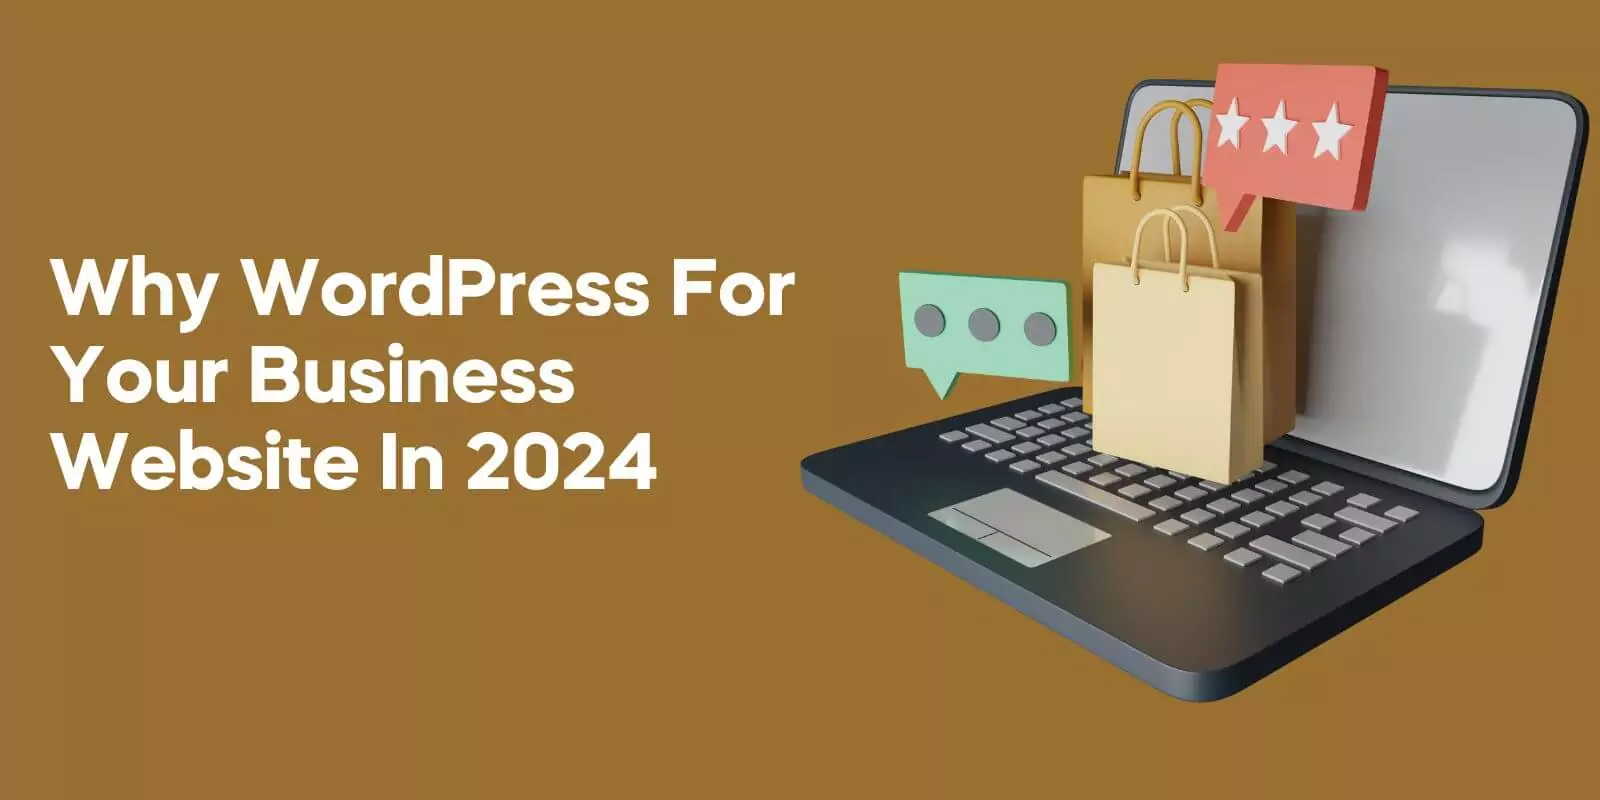 17 Reasons Why You Should Choose WordPress for Your Business Website in 2024